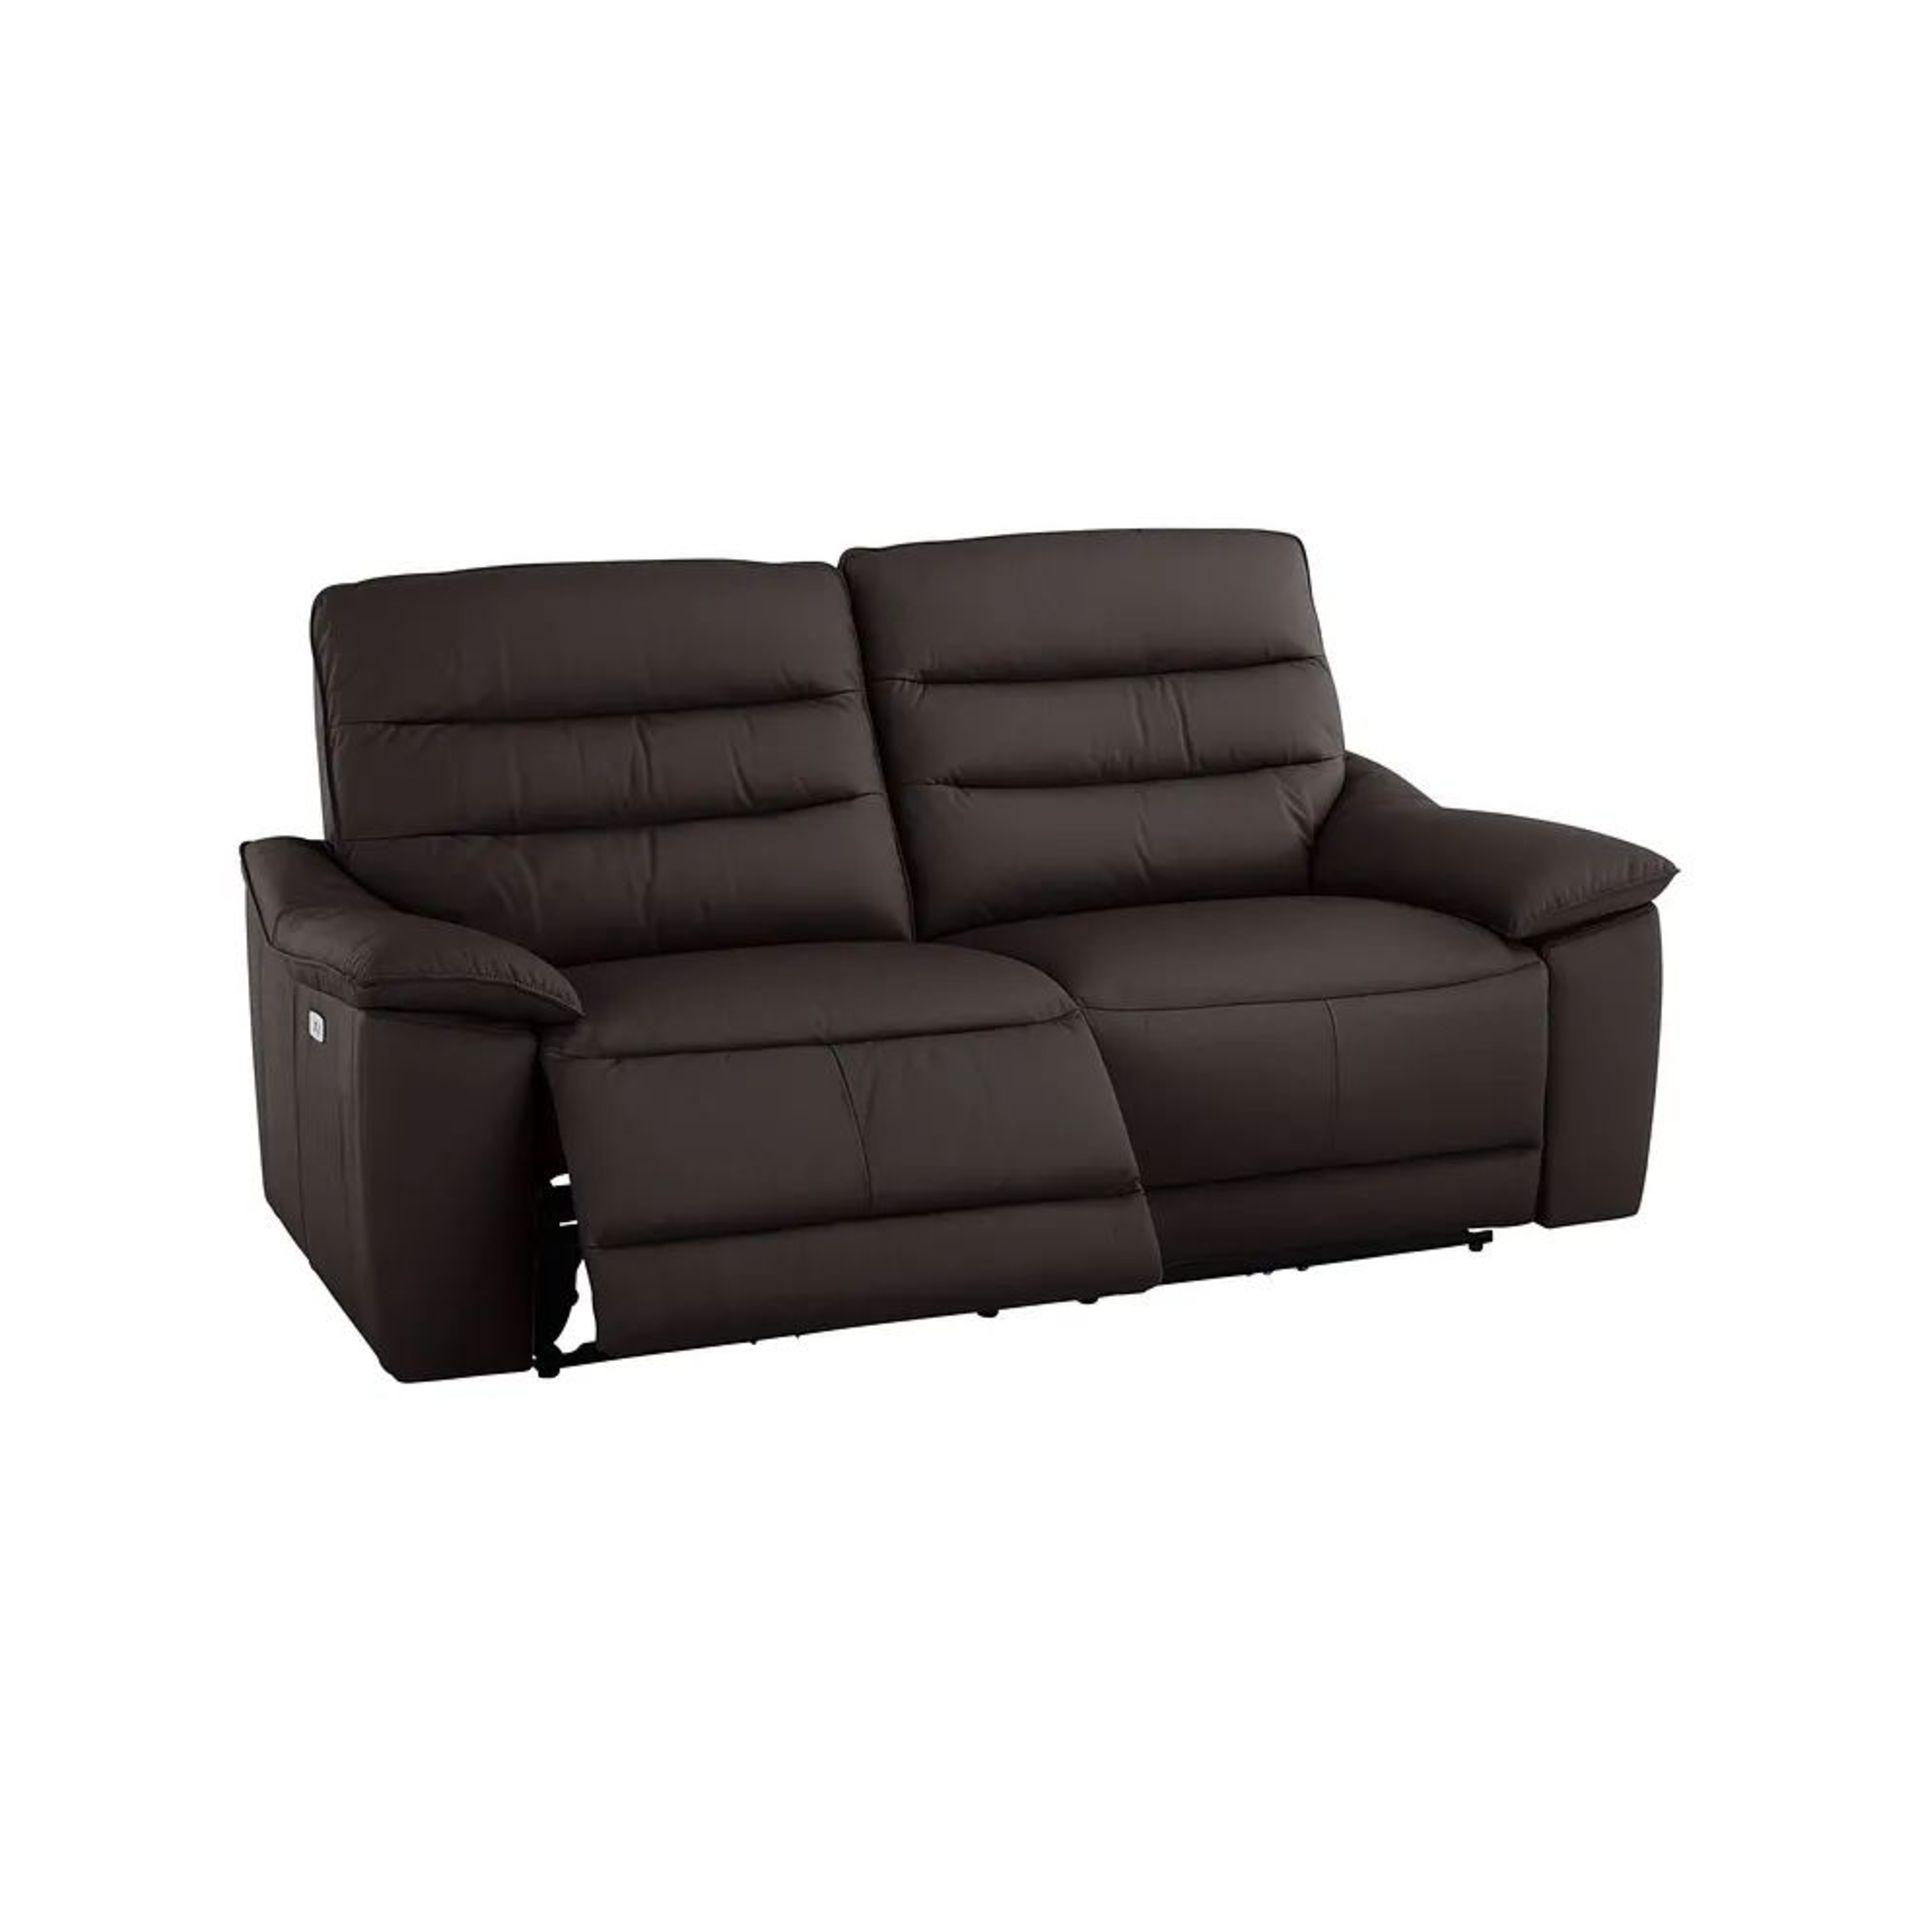 BRAND NEW CARTER 3 Seater Electric Recliner Sofa - BROWN LEATHER. RRP £1699. Showcasing classic - Bild 3 aus 11